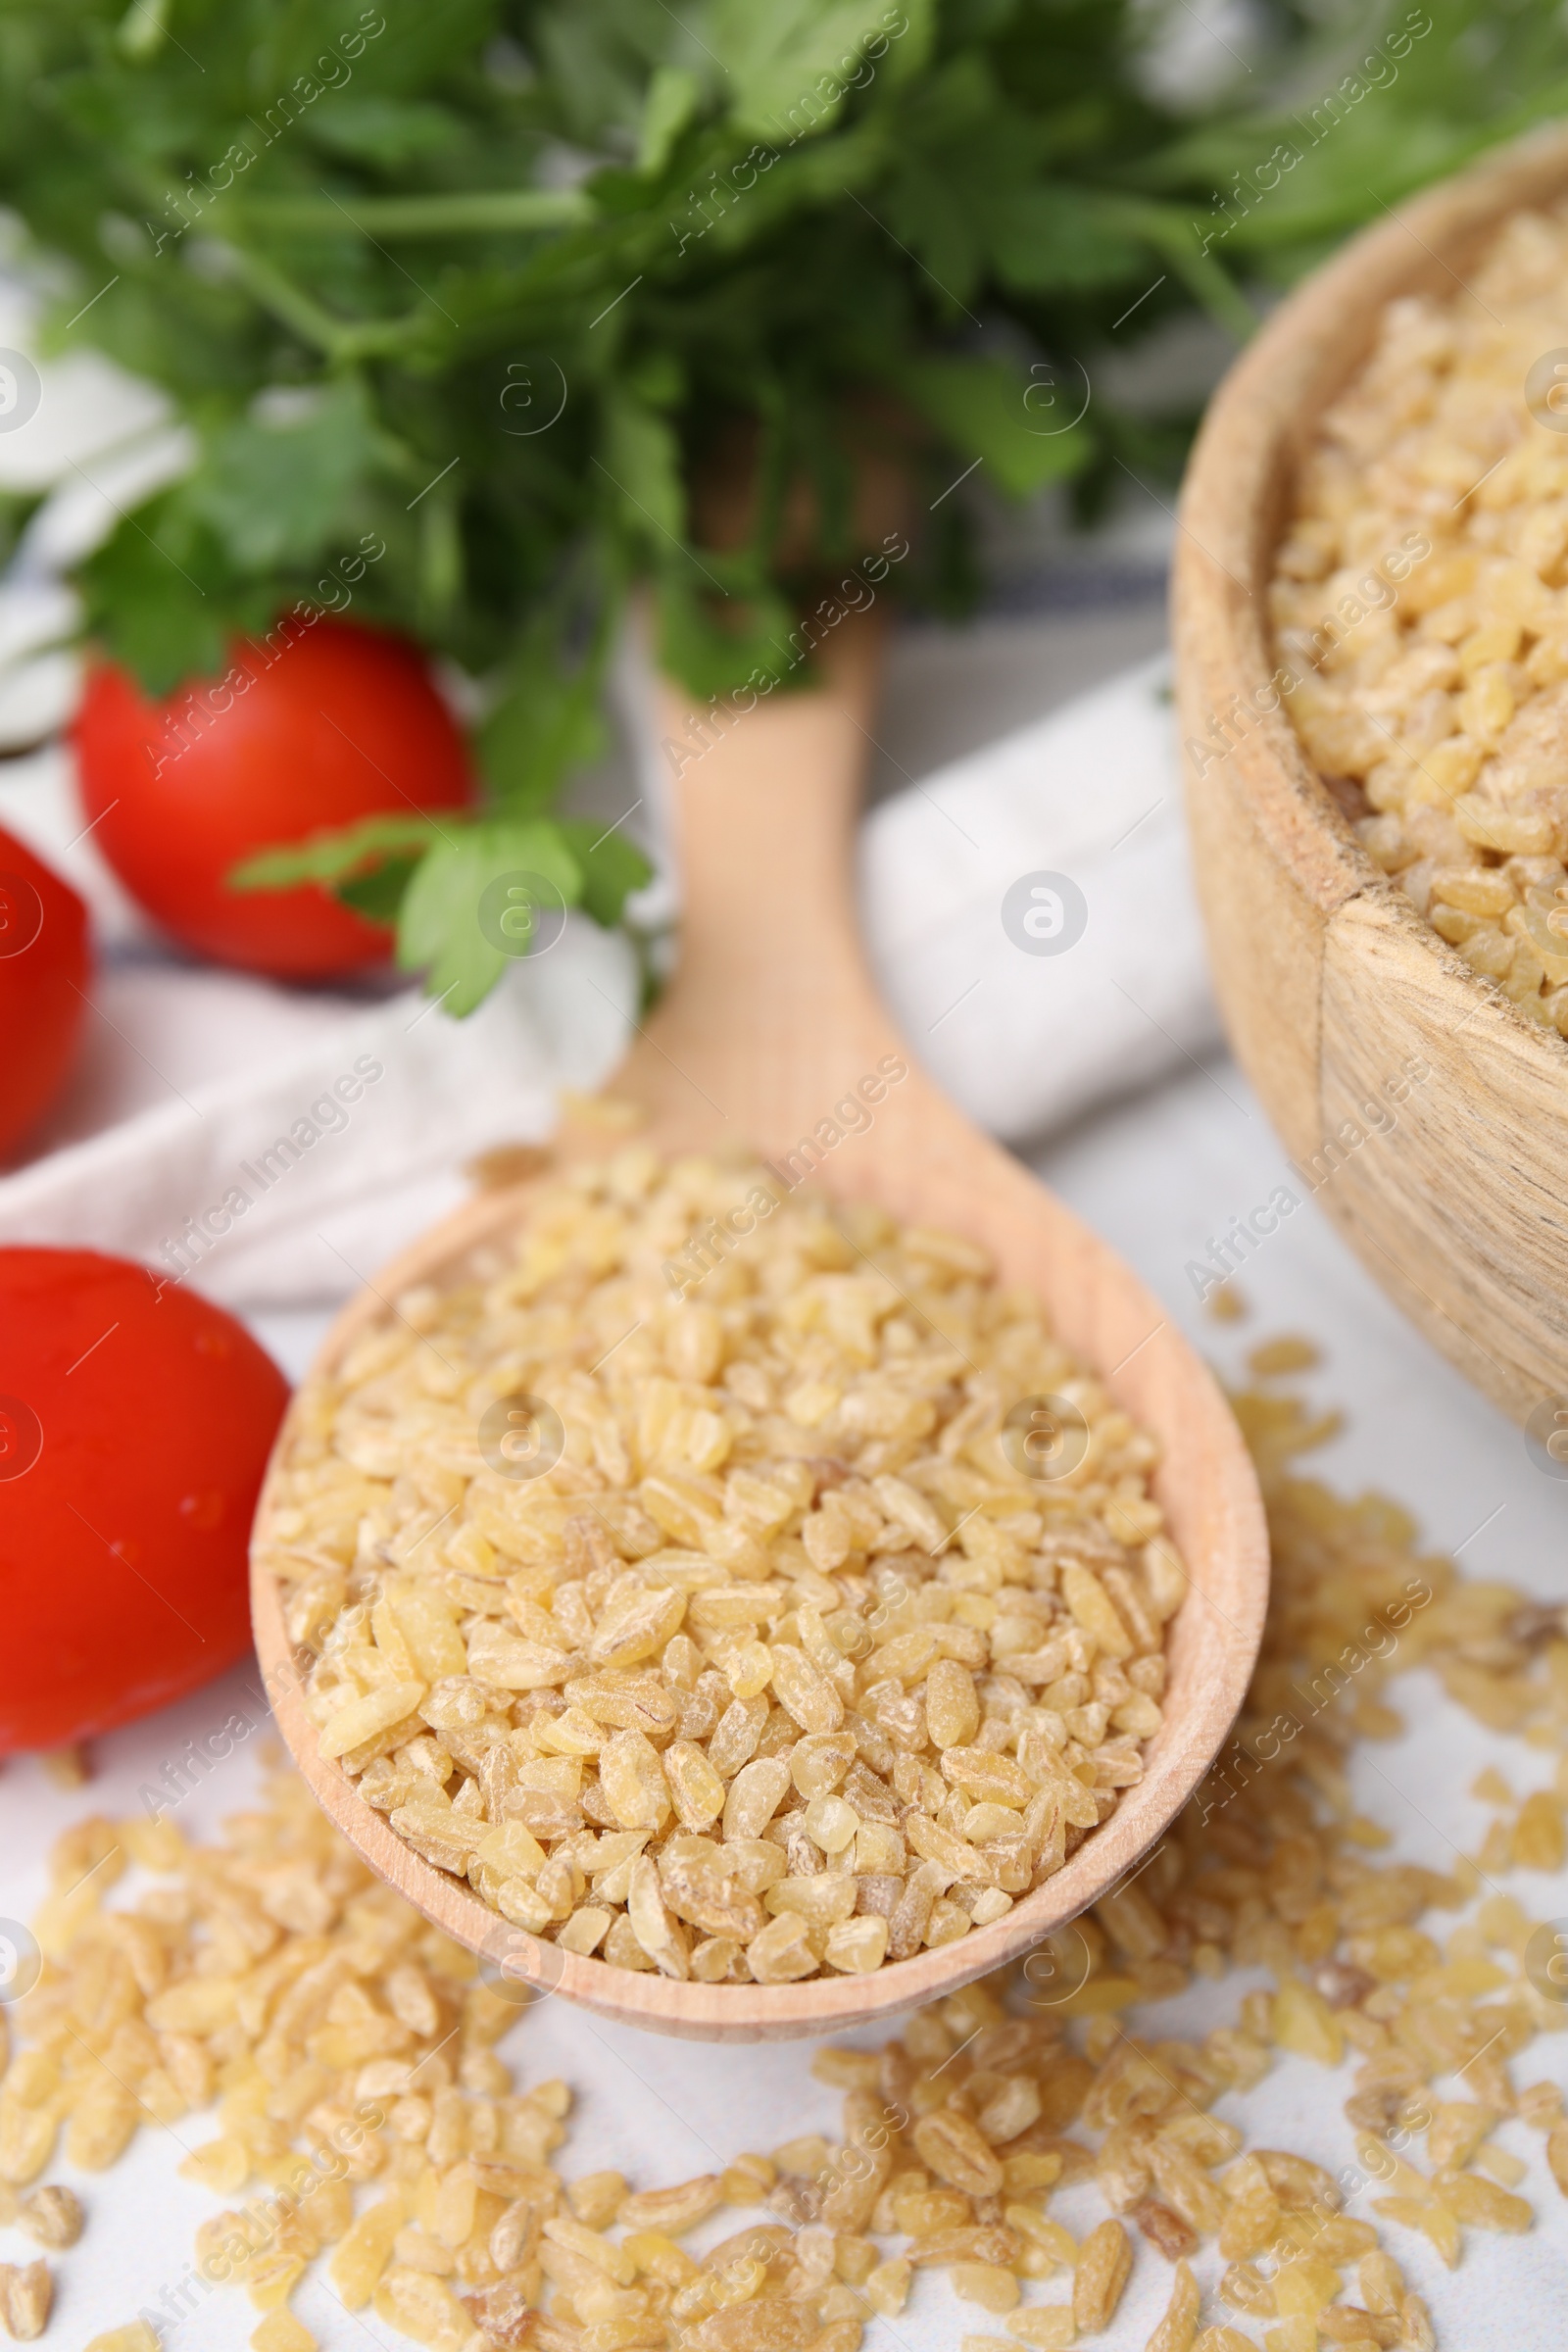 Photo of Spoon with raw bulgur and tomatoes on table, closeup